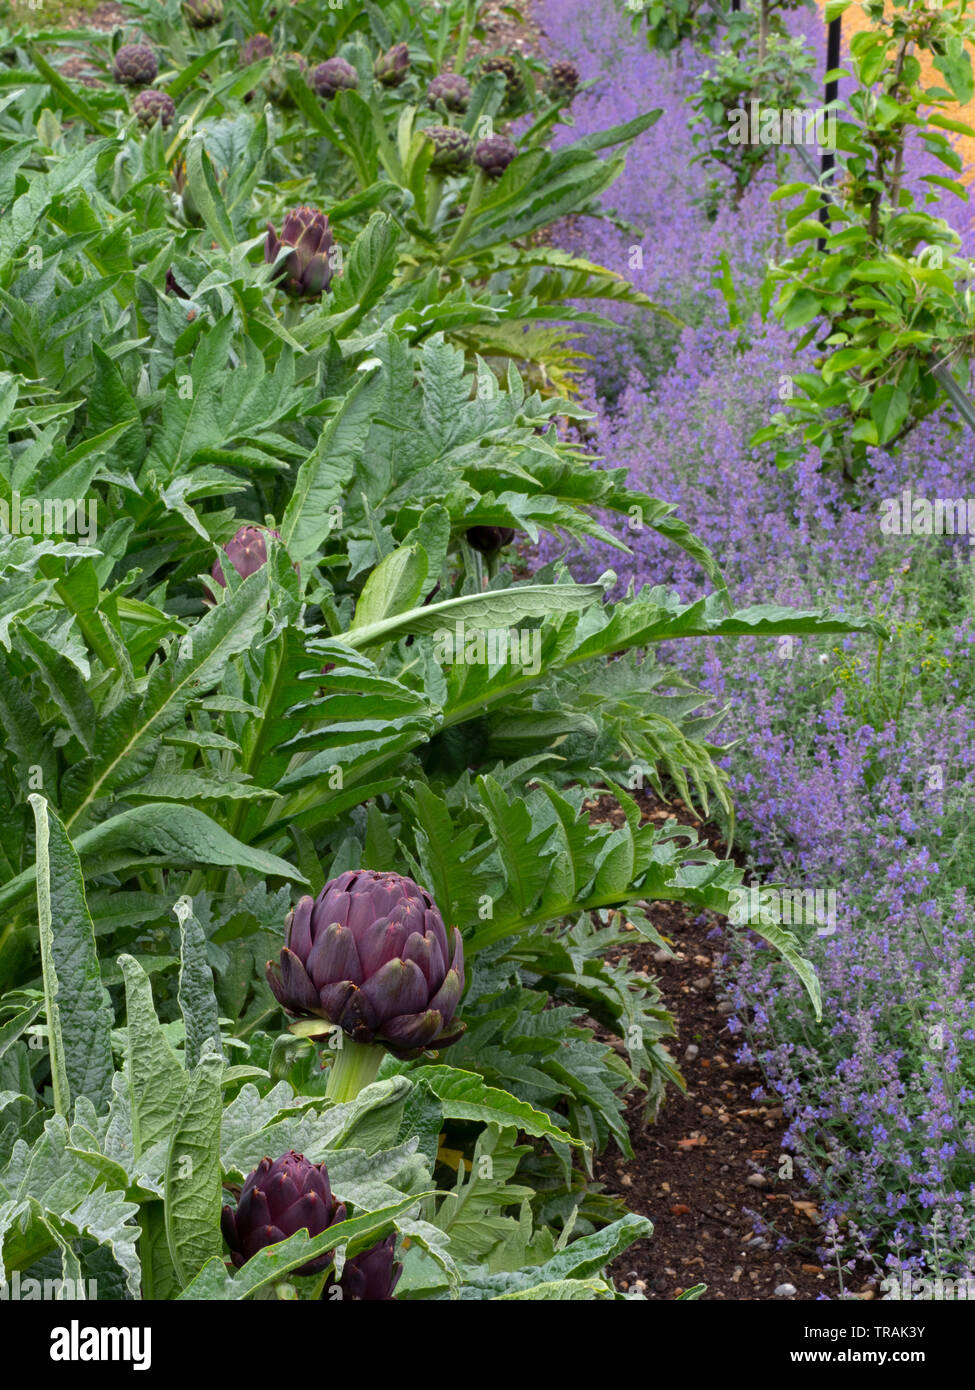 Globe artichoke or Cardoon Thistle Cynara cardunculus flower bud before opening with catmint border Stock Photo